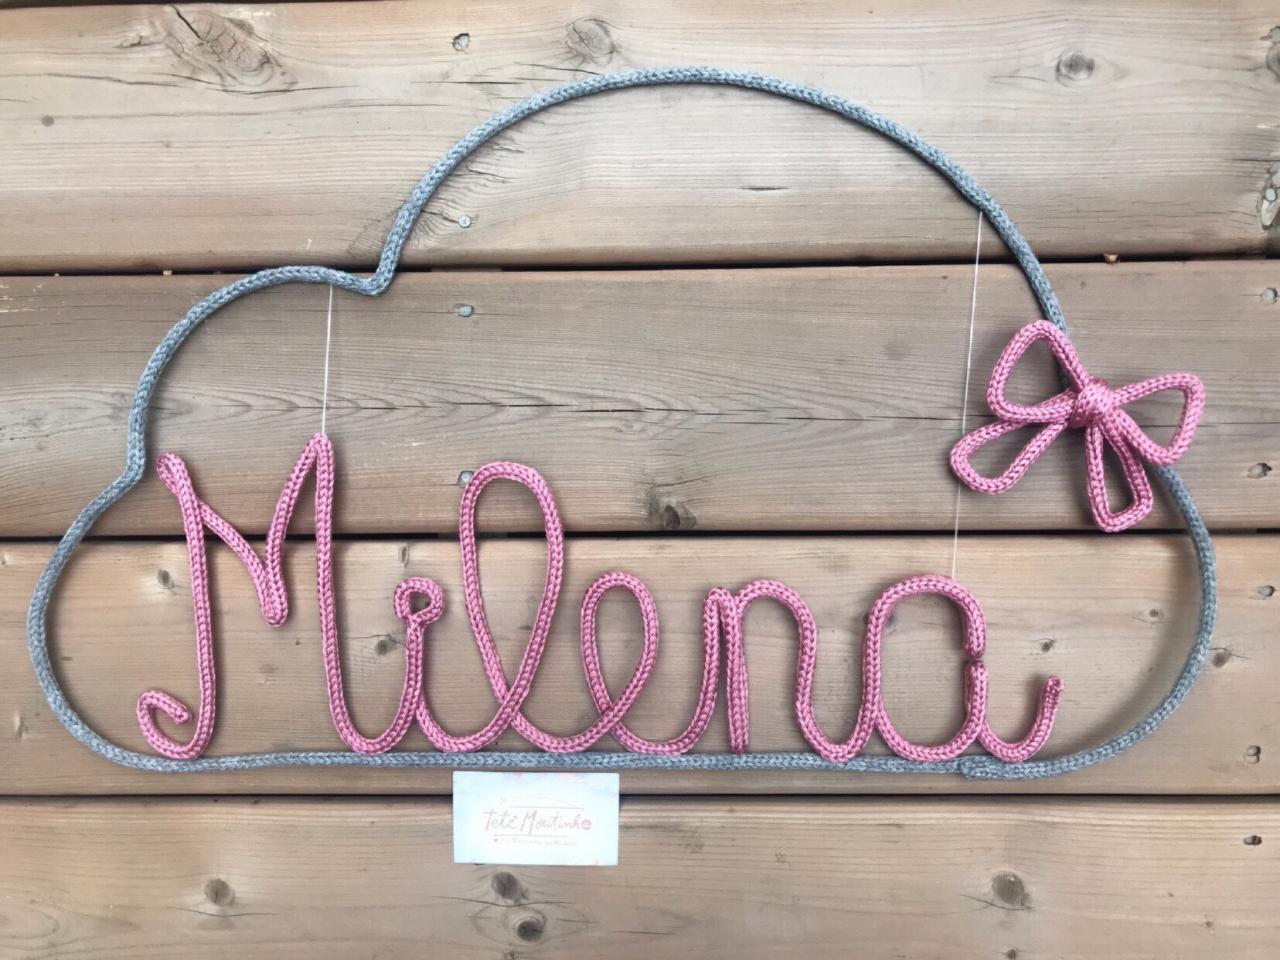 HAIR BOW HOLDER,Custom Name Hair Bow Holder,Bows Clippies Organizer,Girls Personal Hair Bow, Bow Display,Personalized Hair Accessory Storage